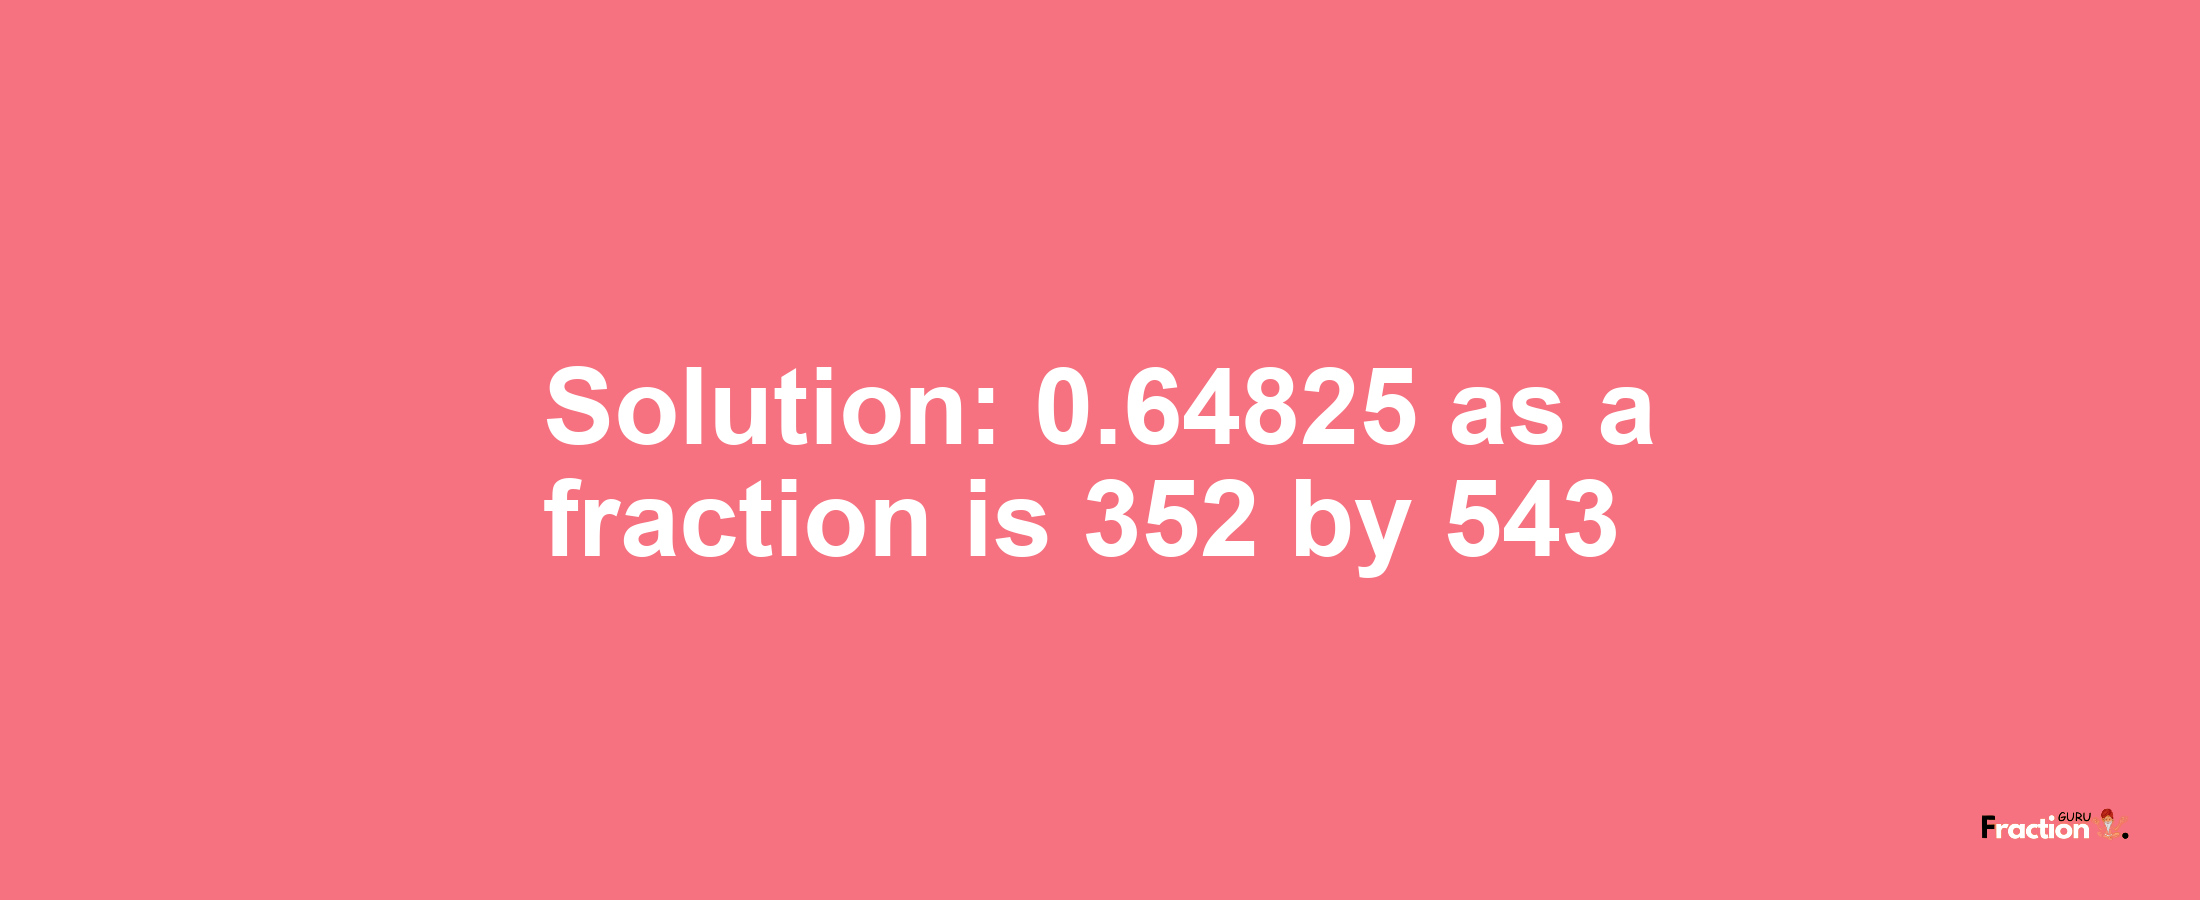 Solution:0.64825 as a fraction is 352/543